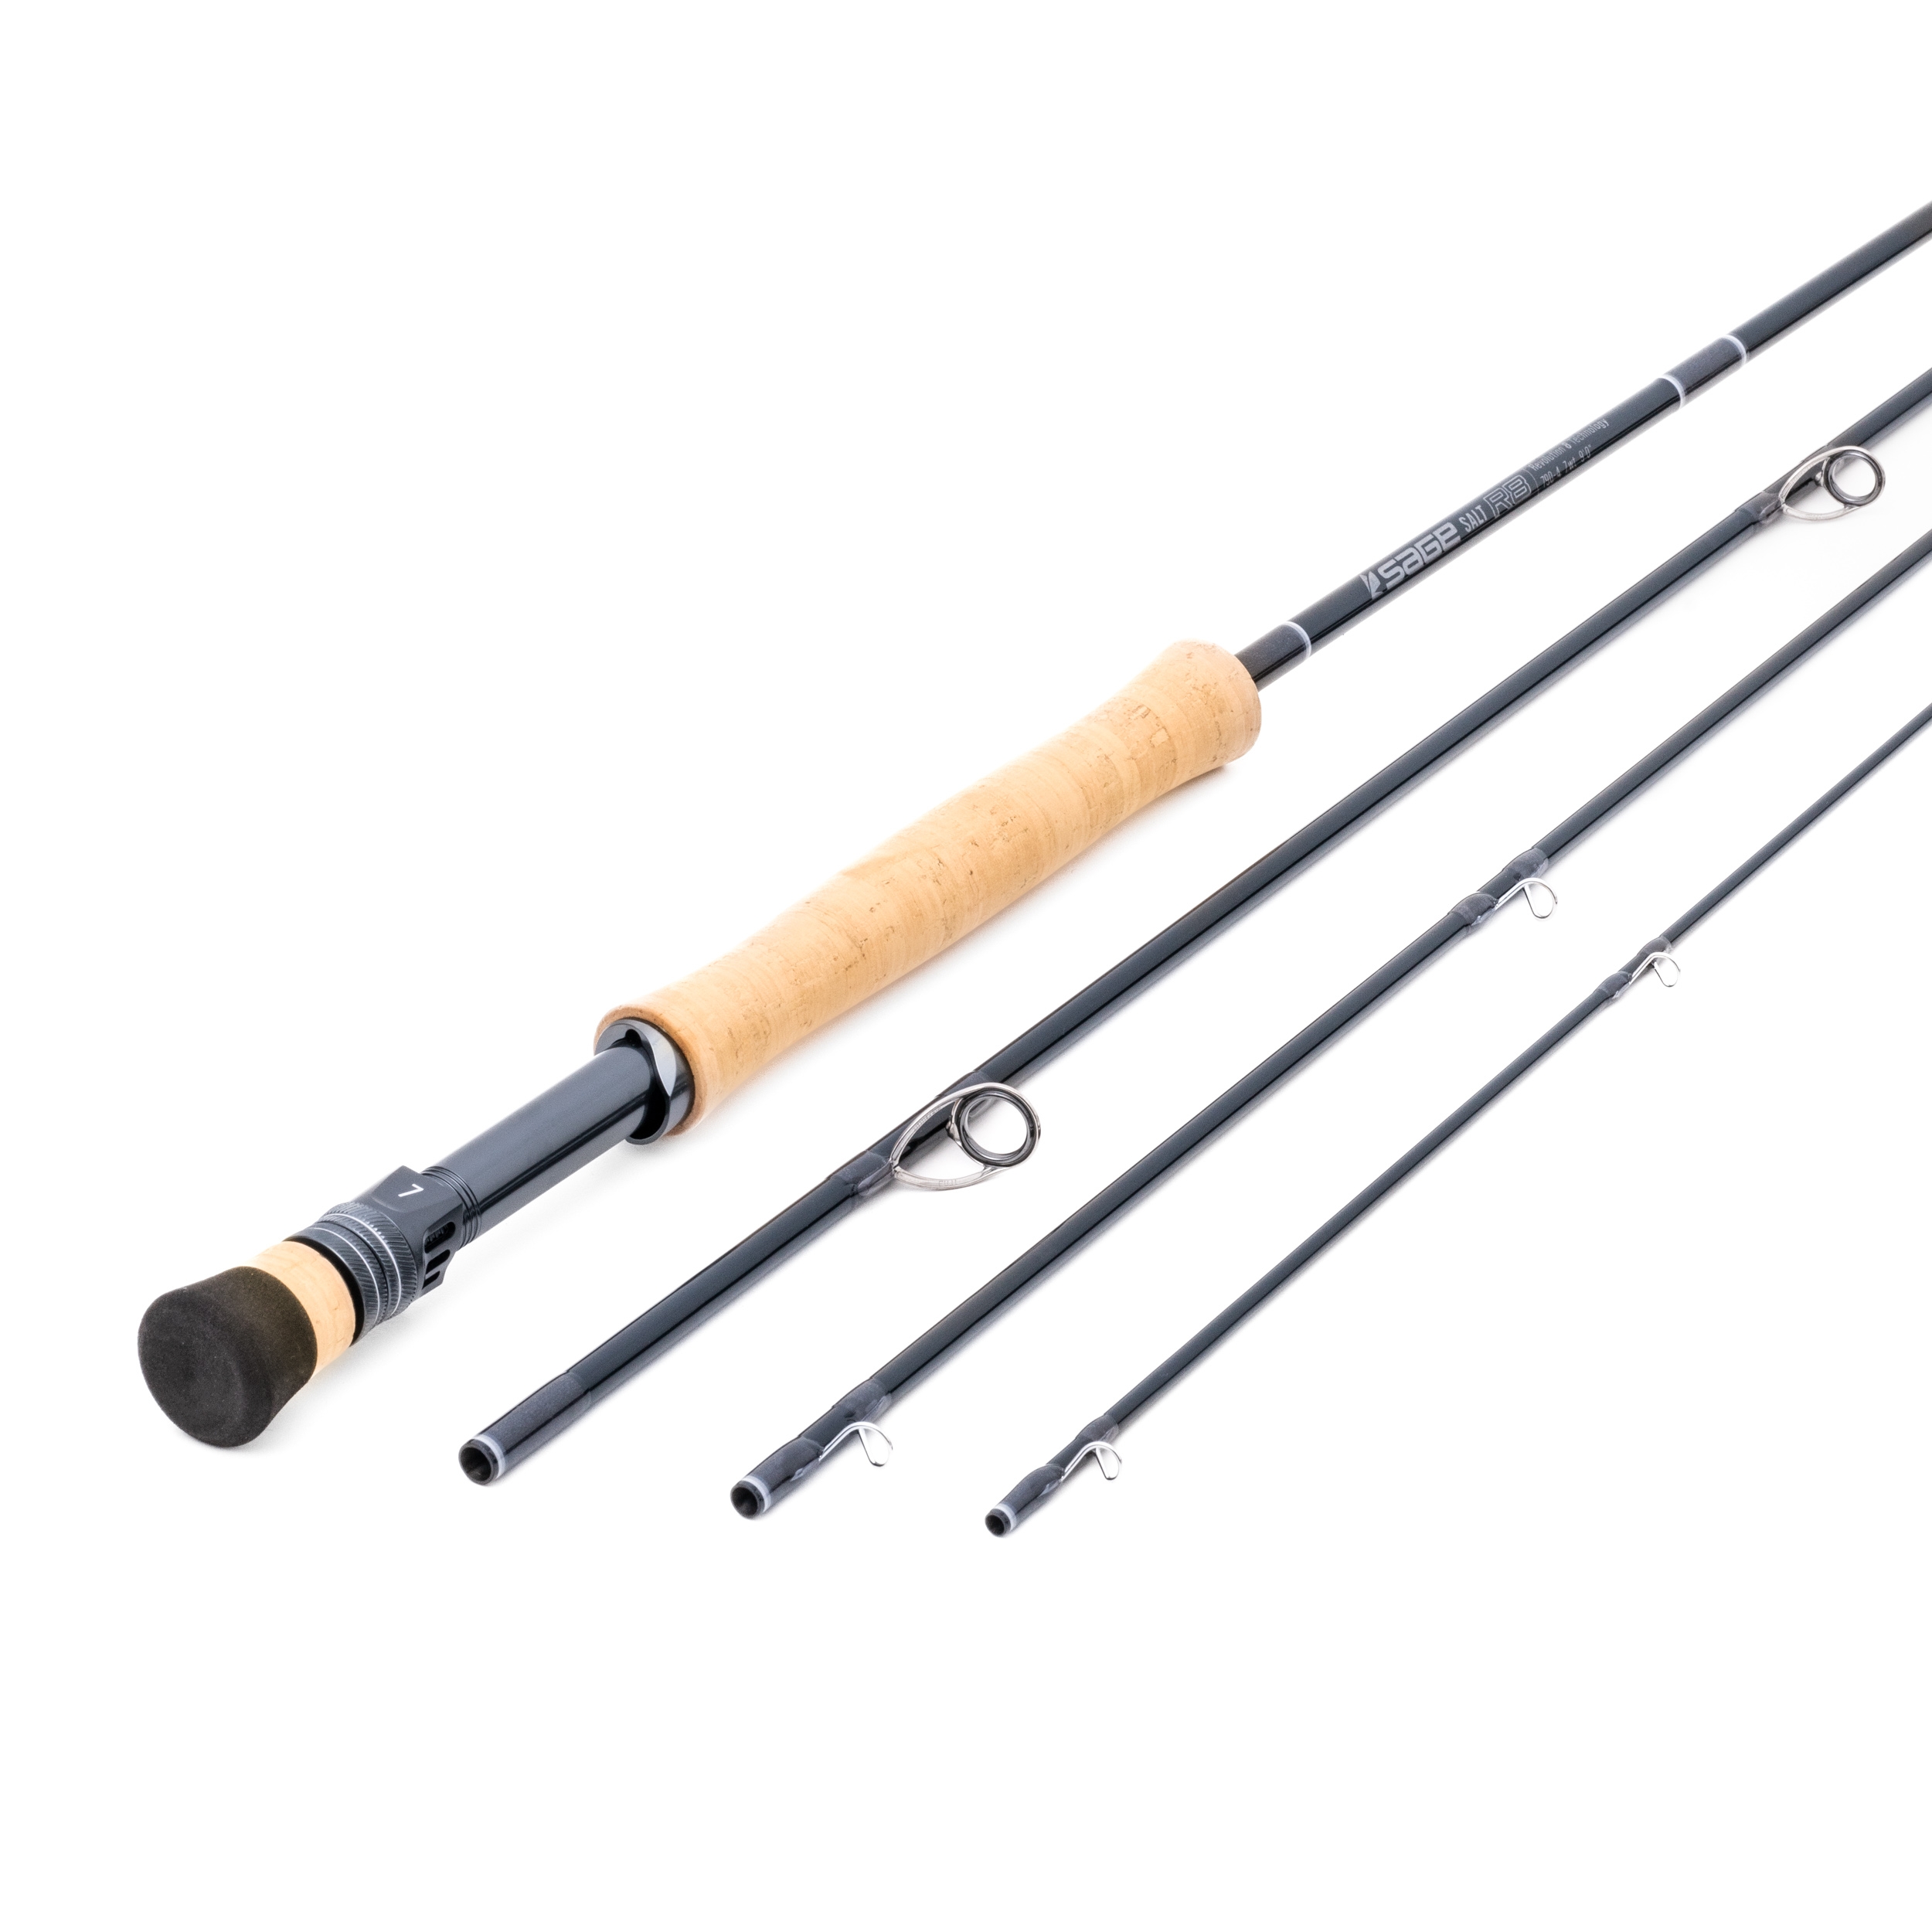 Saltwater Fly Fishing Rods - Angling Active